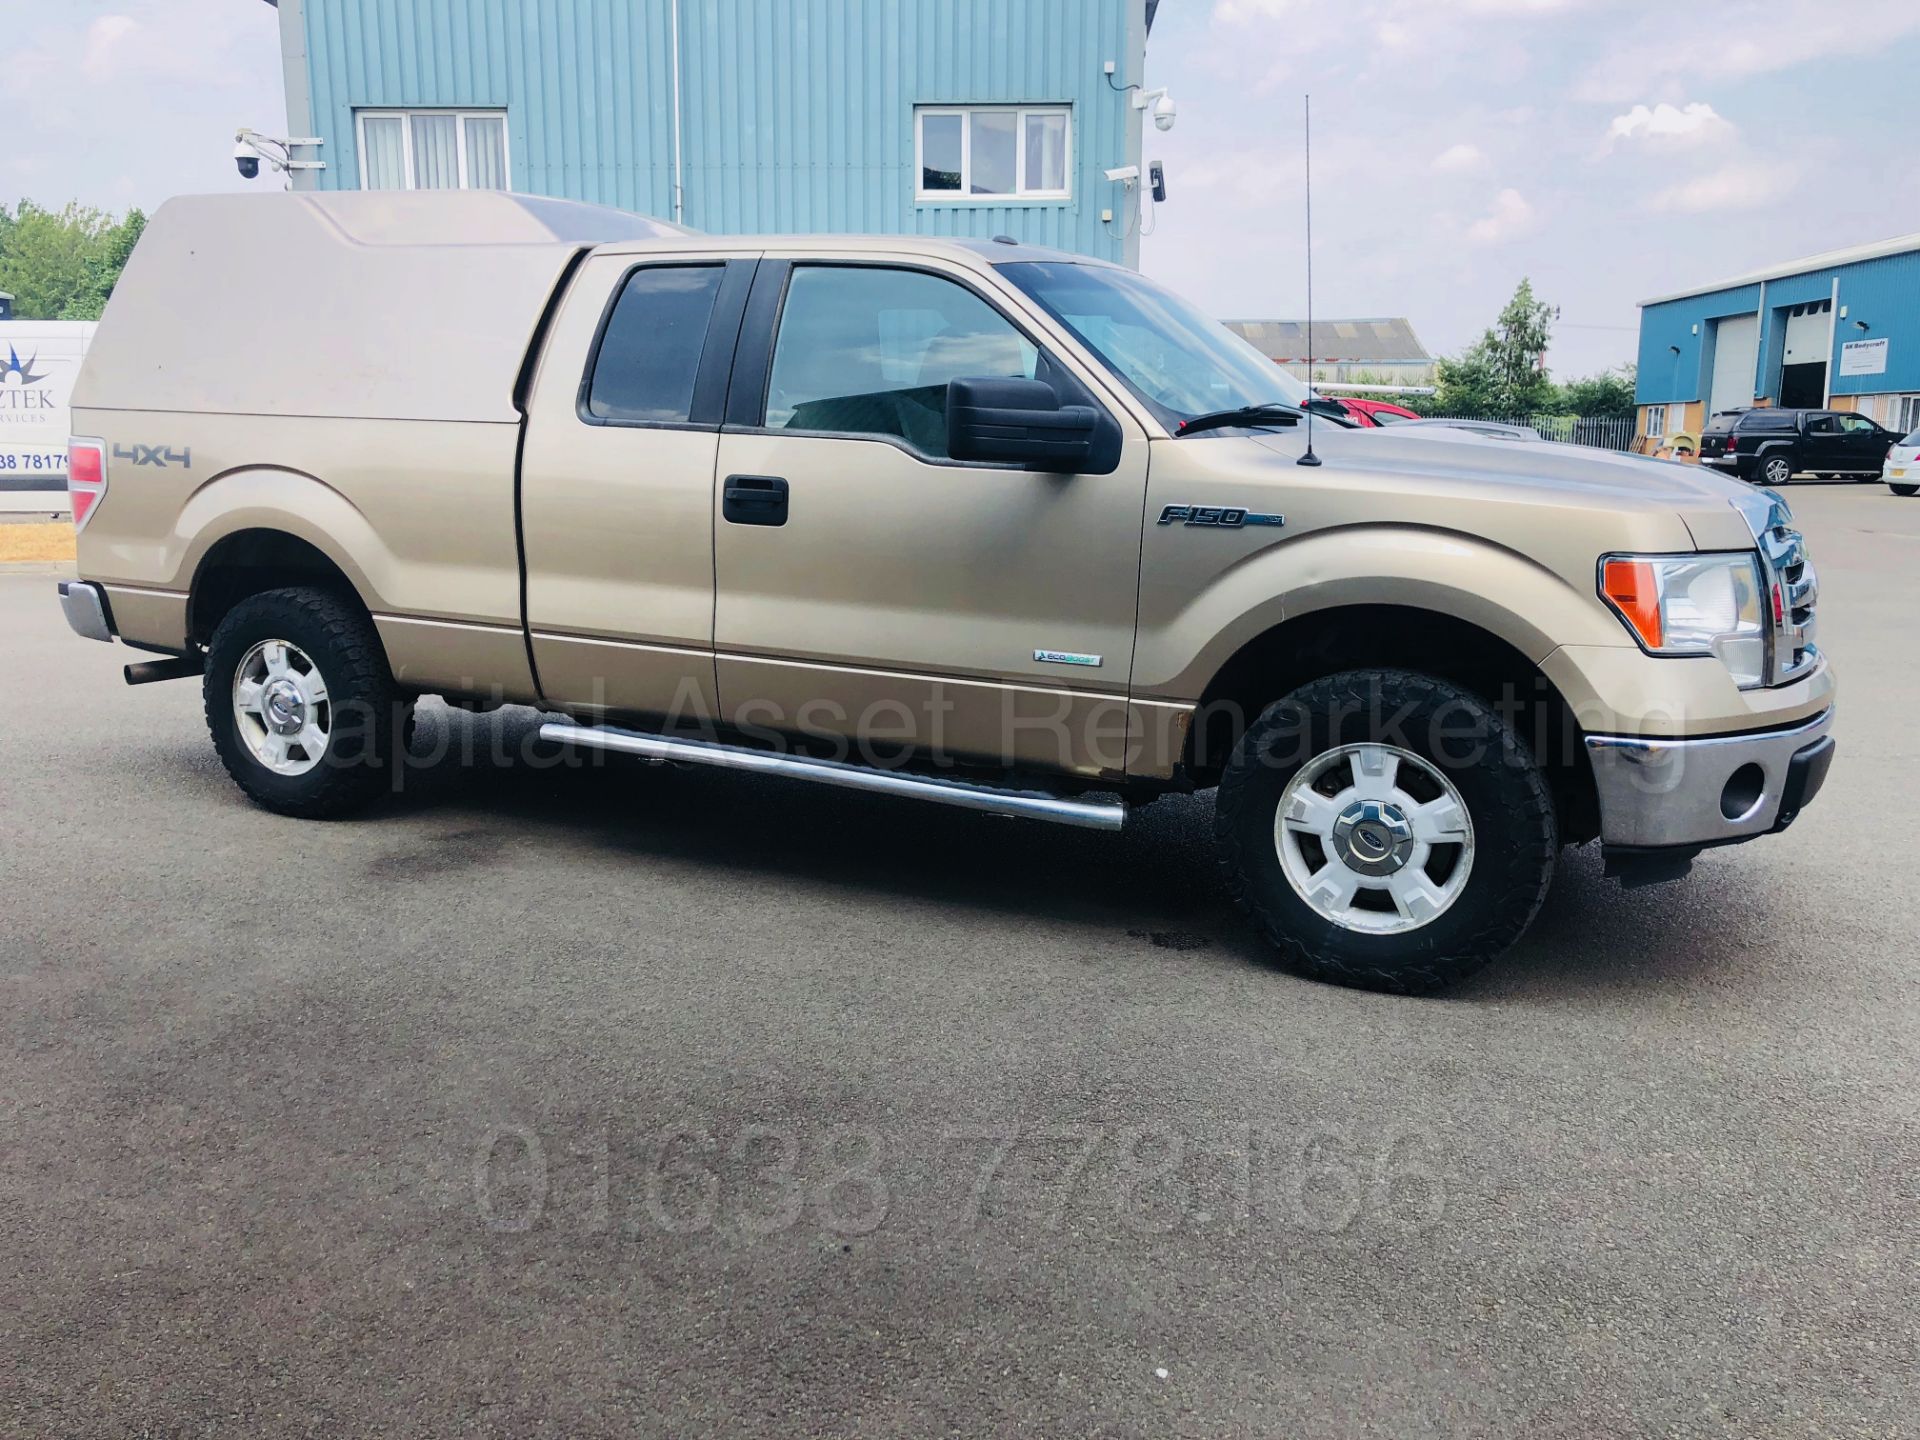 (On Sale) FORD F-150 5.4 V8 XLT EDITION KING-CAB (2012) MODEL**4X4**6 SEATER**AUTOMATIC *TOP SPEC* - Image 12 of 52